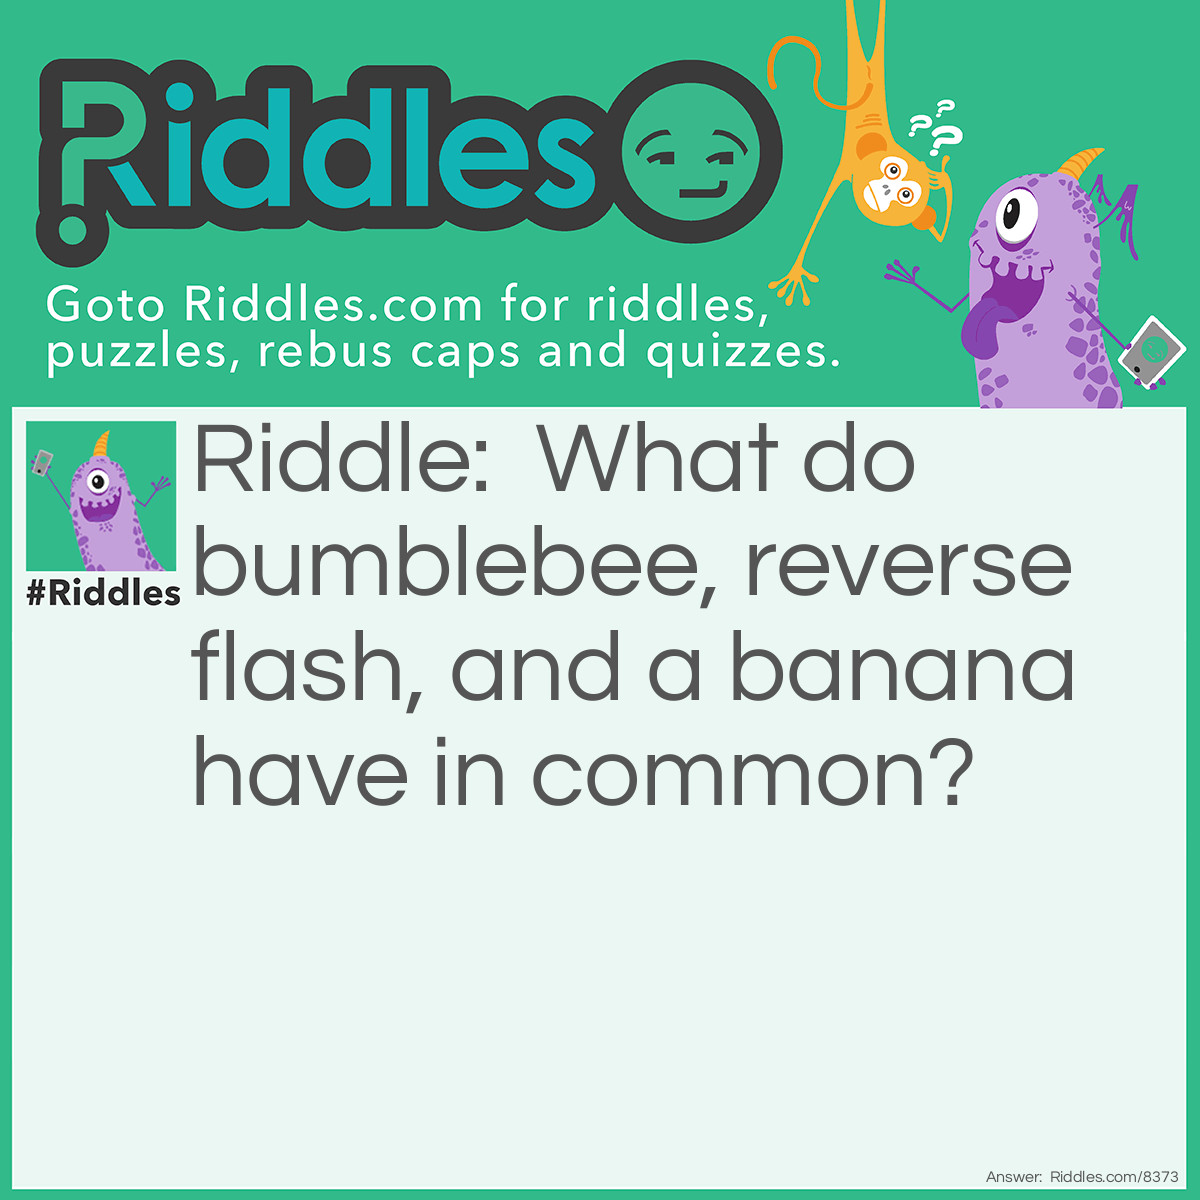 Riddle: What do bumblebee, reverse flash, and a banana have in common? Answer: The colour yellow.